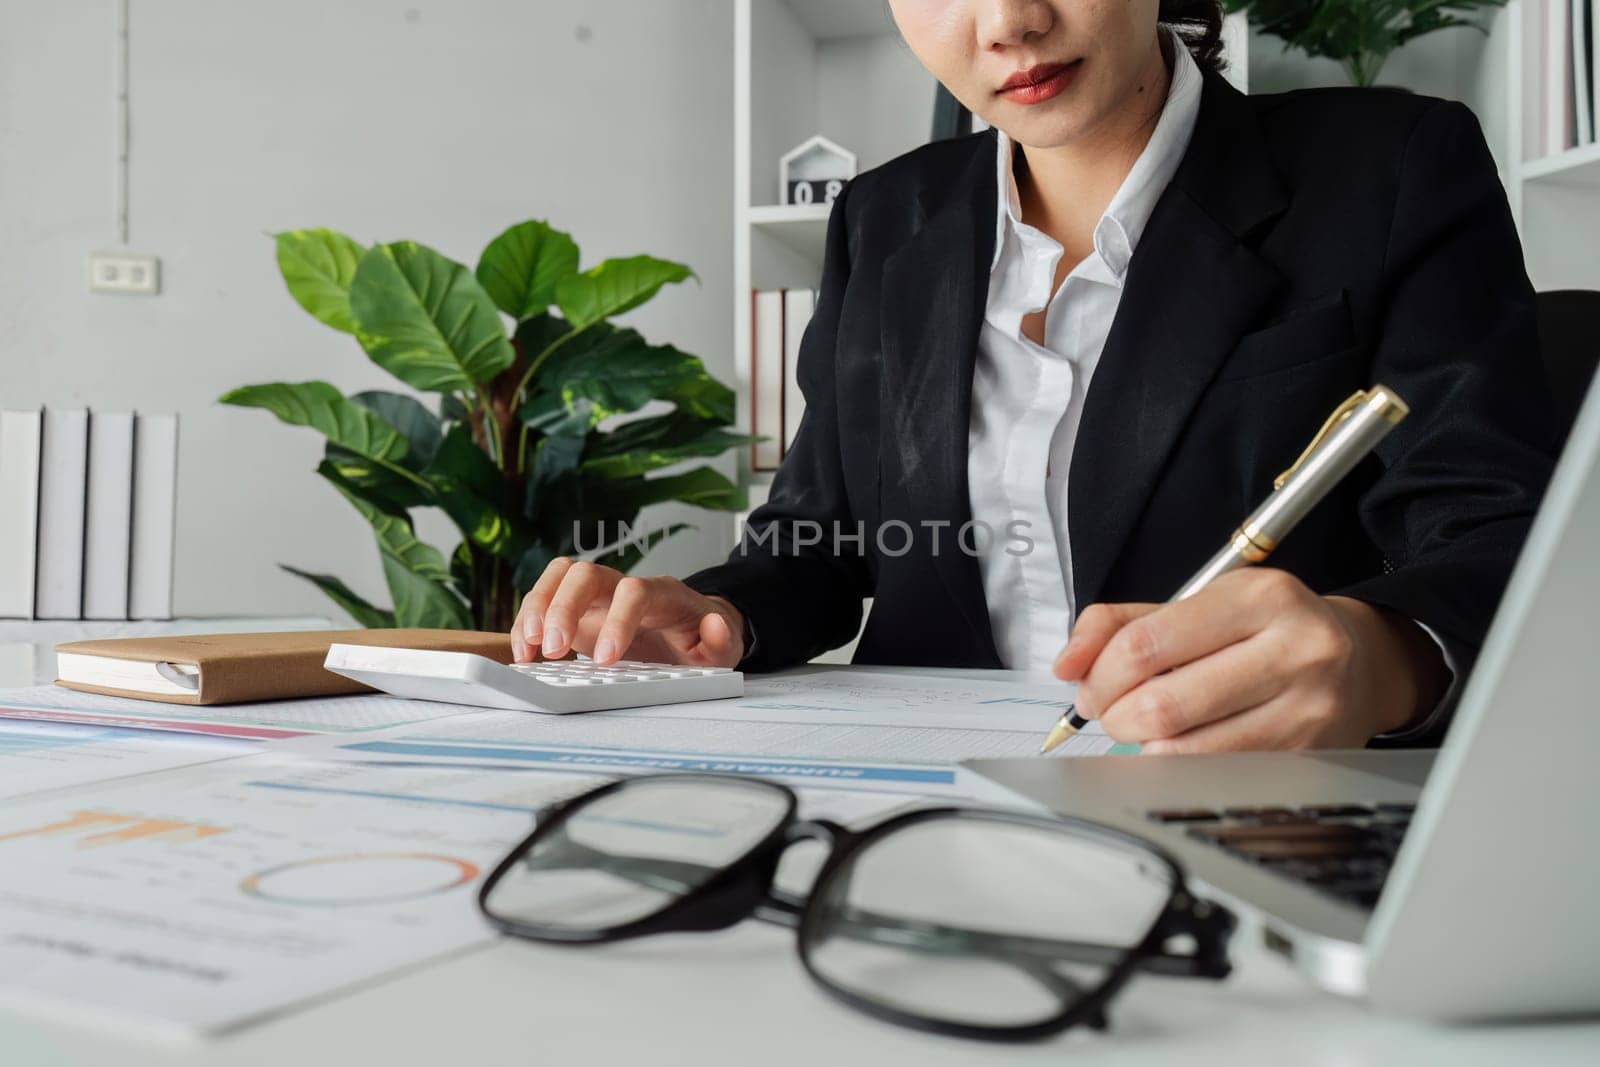 A woman is writing on a piece of paper with a pen. She is wearing a black suit and is sitting at a desk. The paper has a lot of numbers and calculations on it